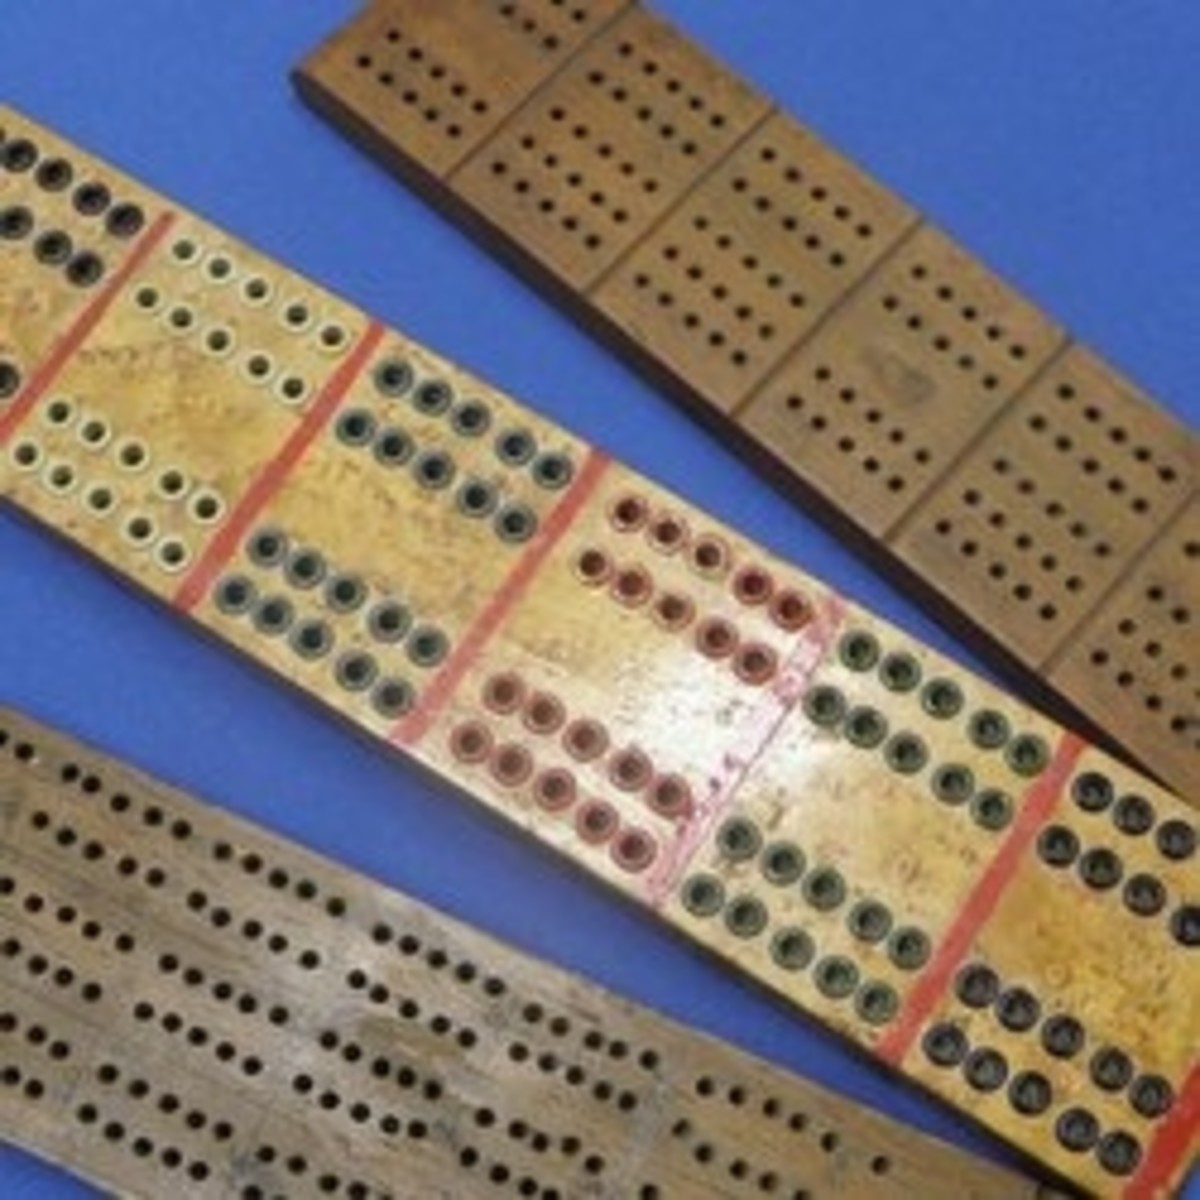 Vintage and Antique Cribbage Board Collecting